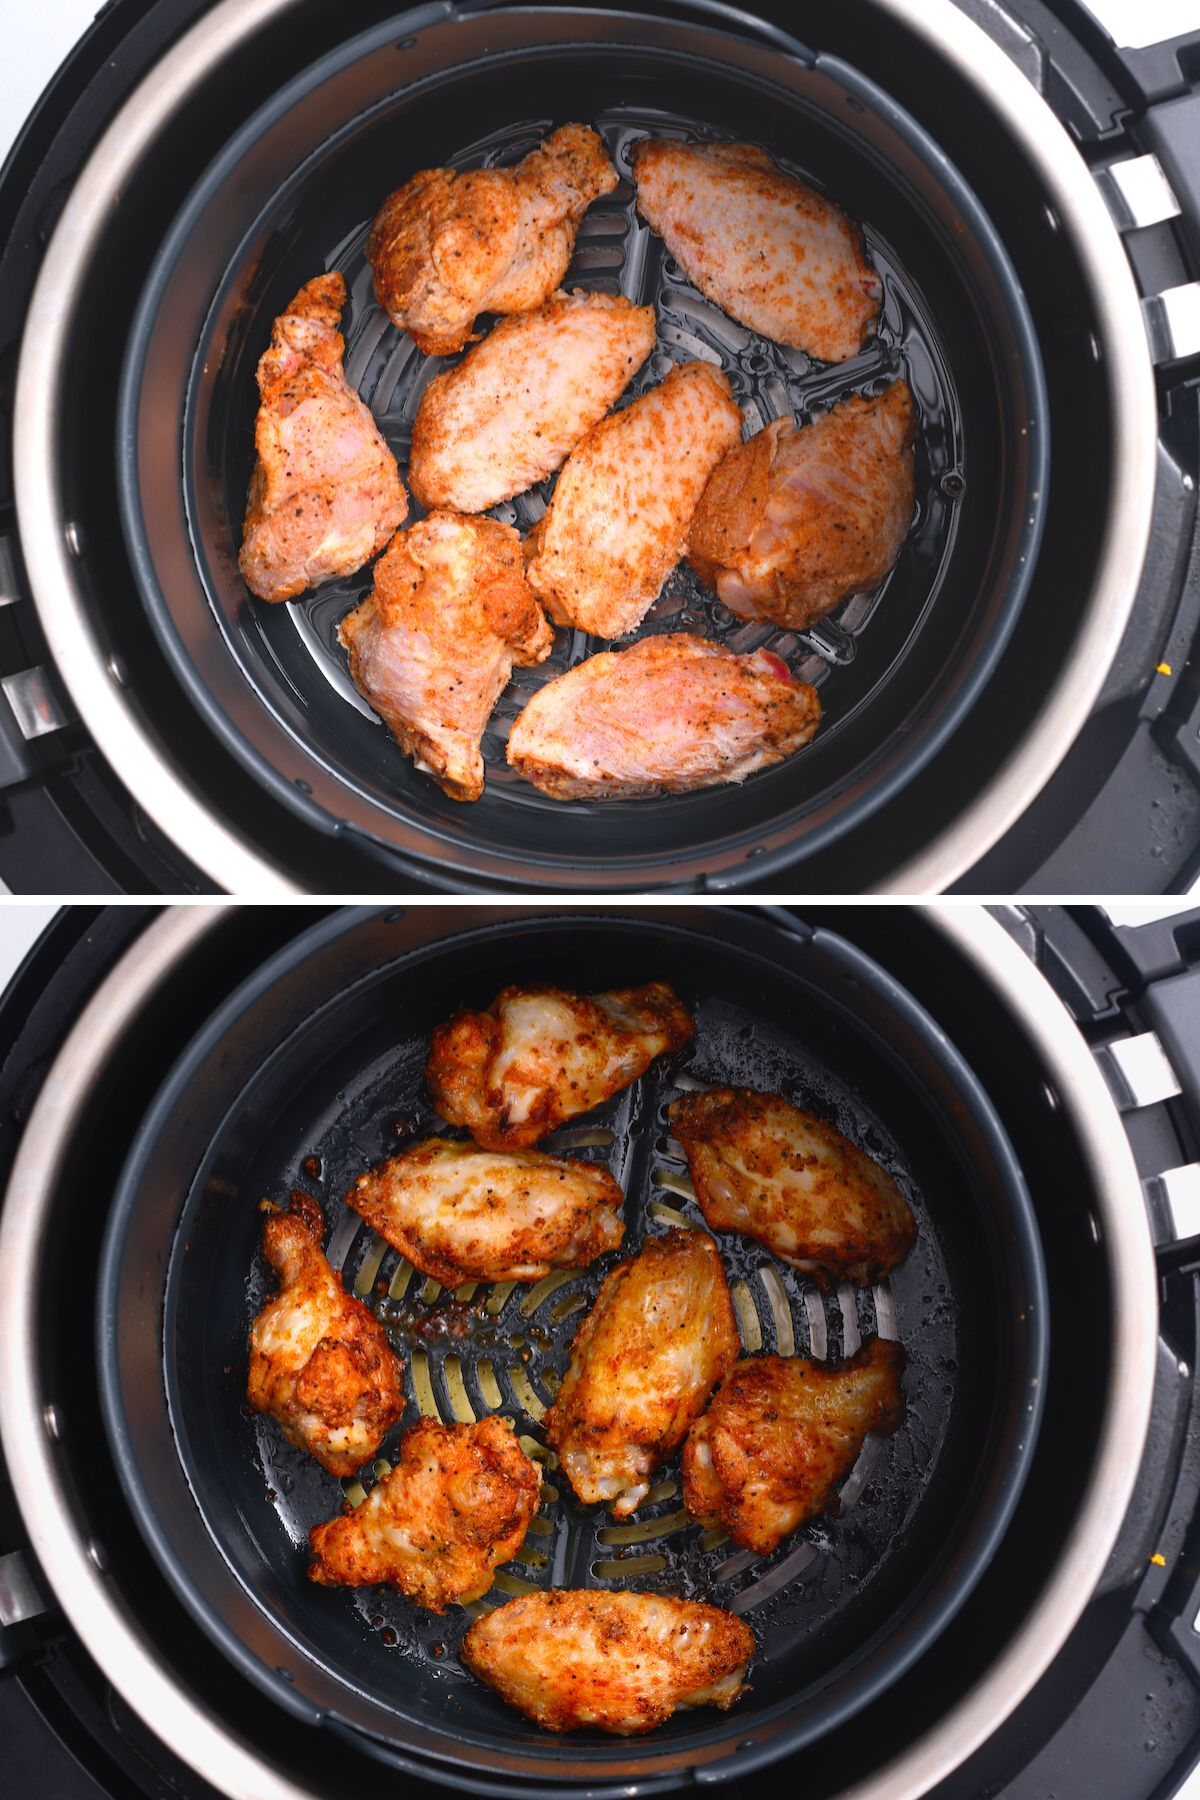 Before and after air frying chicken wings